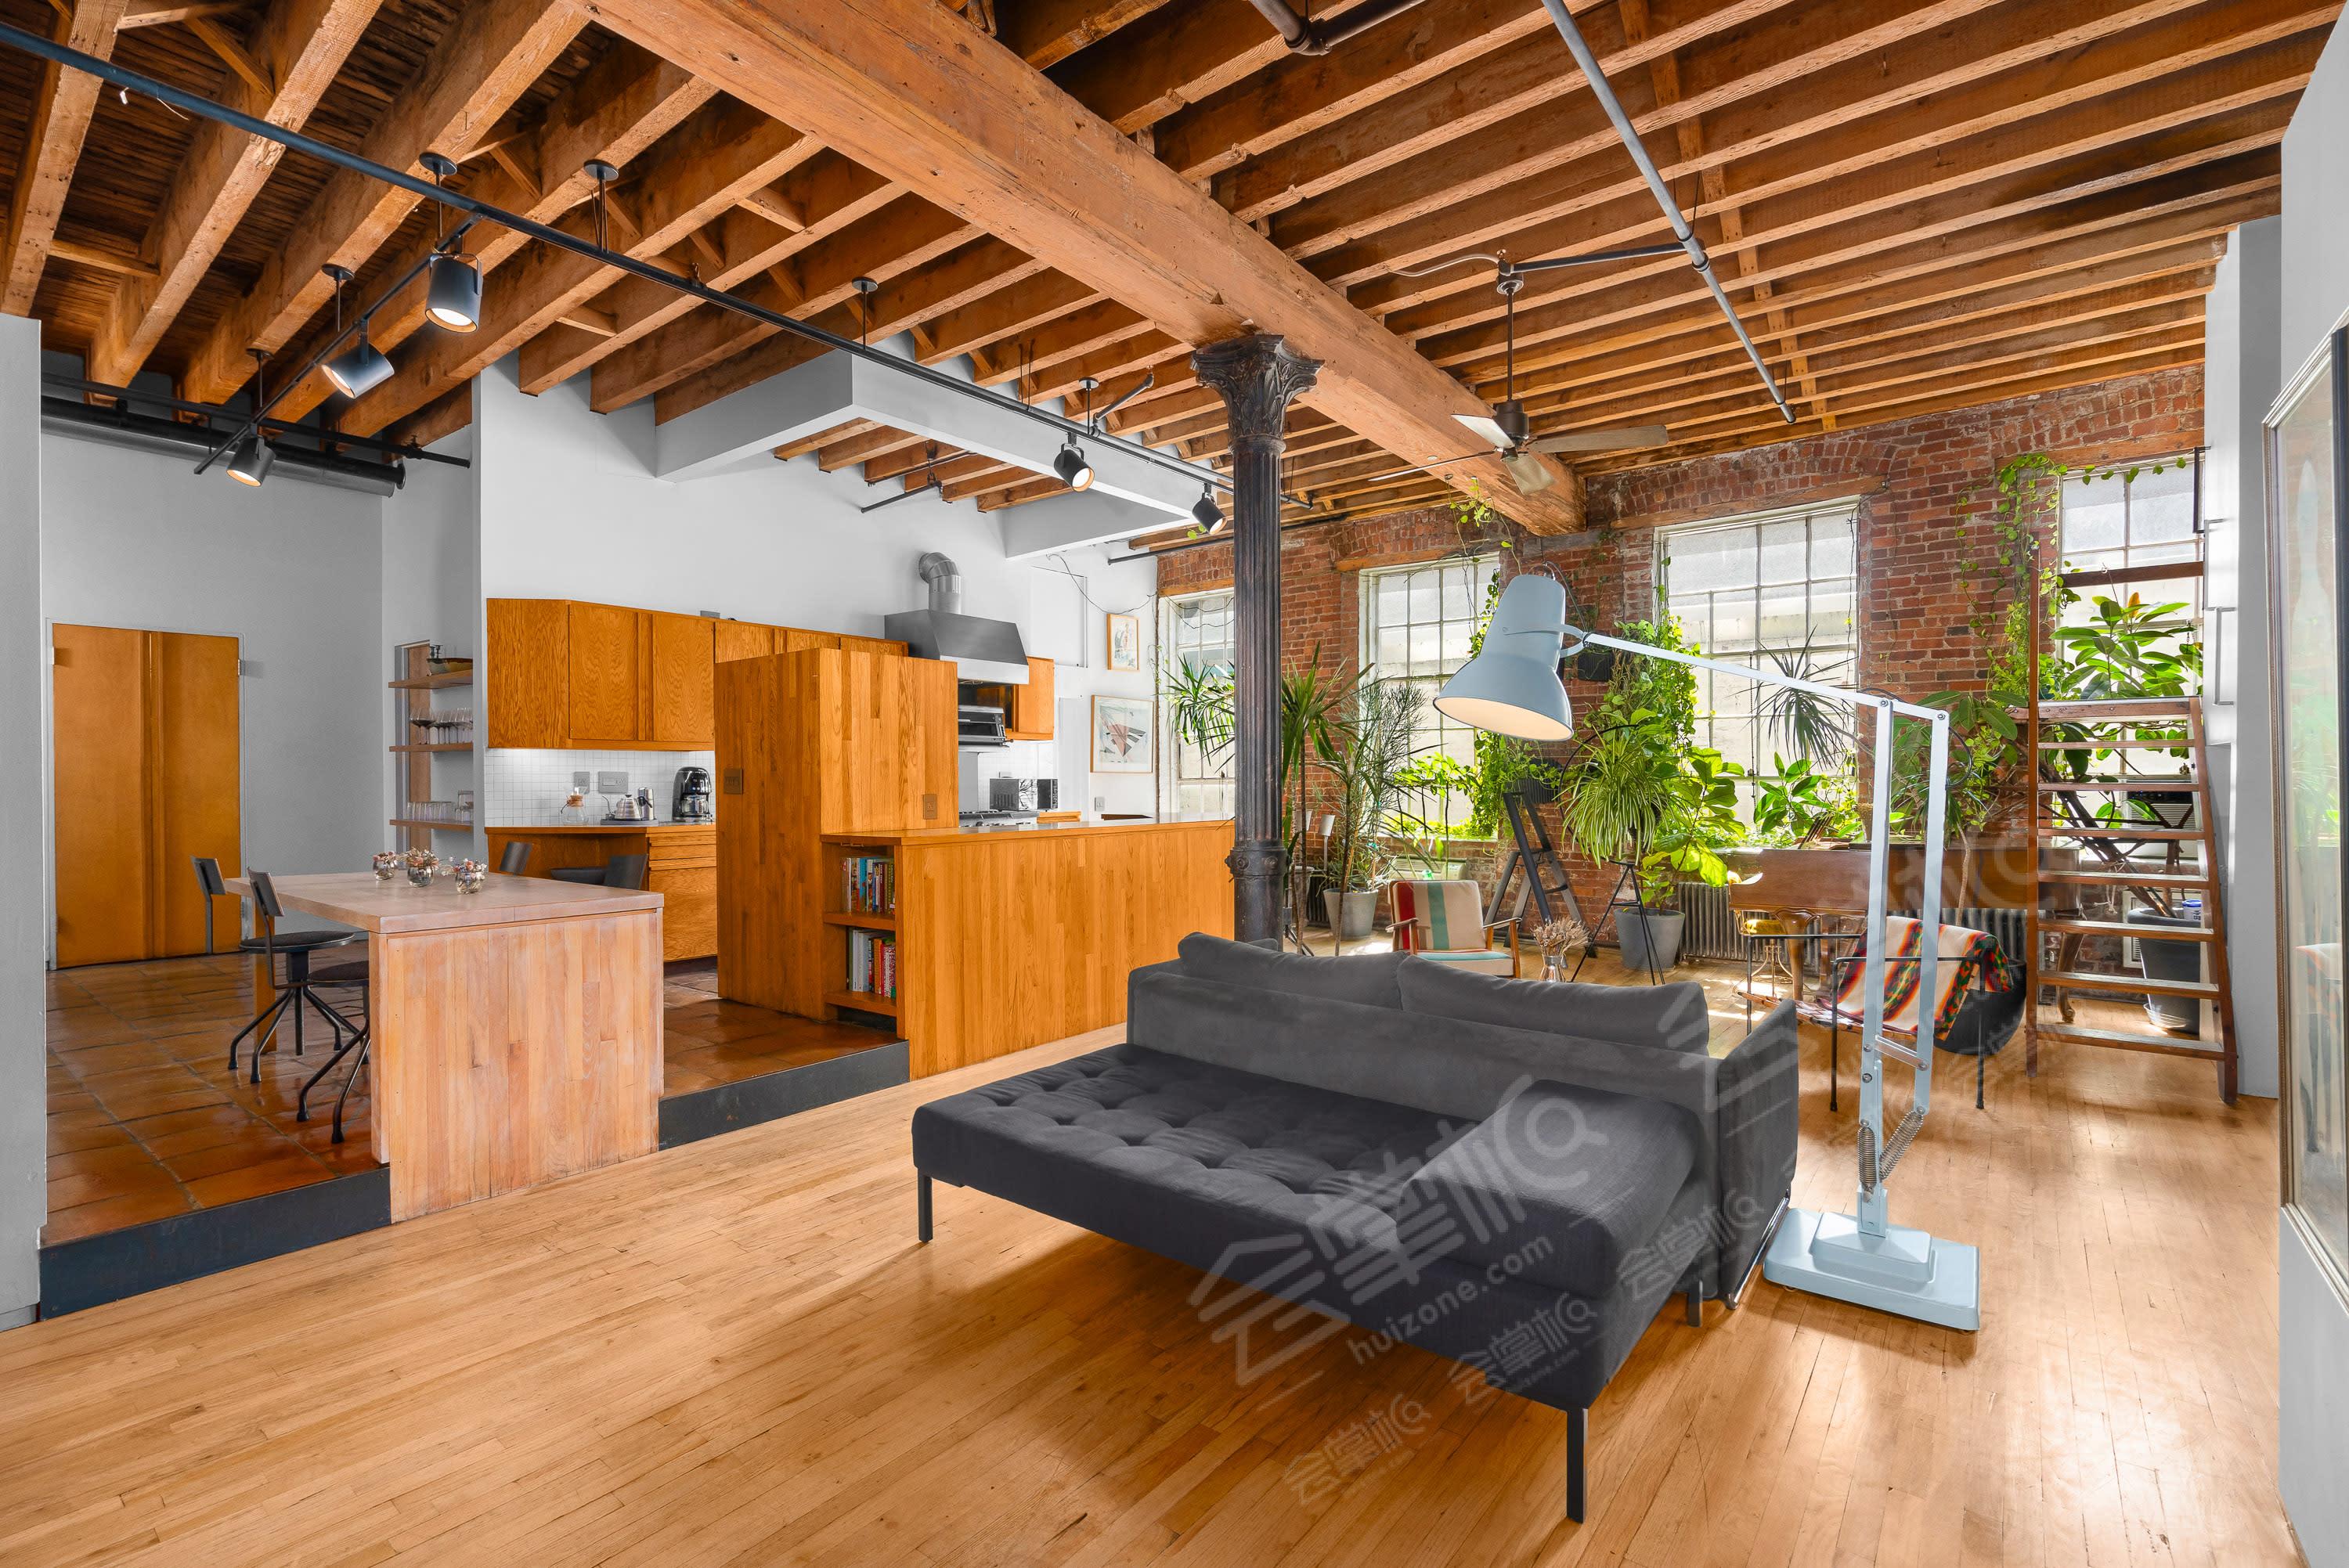 Dreamy Village loft with baby grand piano, plants, 15ft ceilings, 3500 sq ft